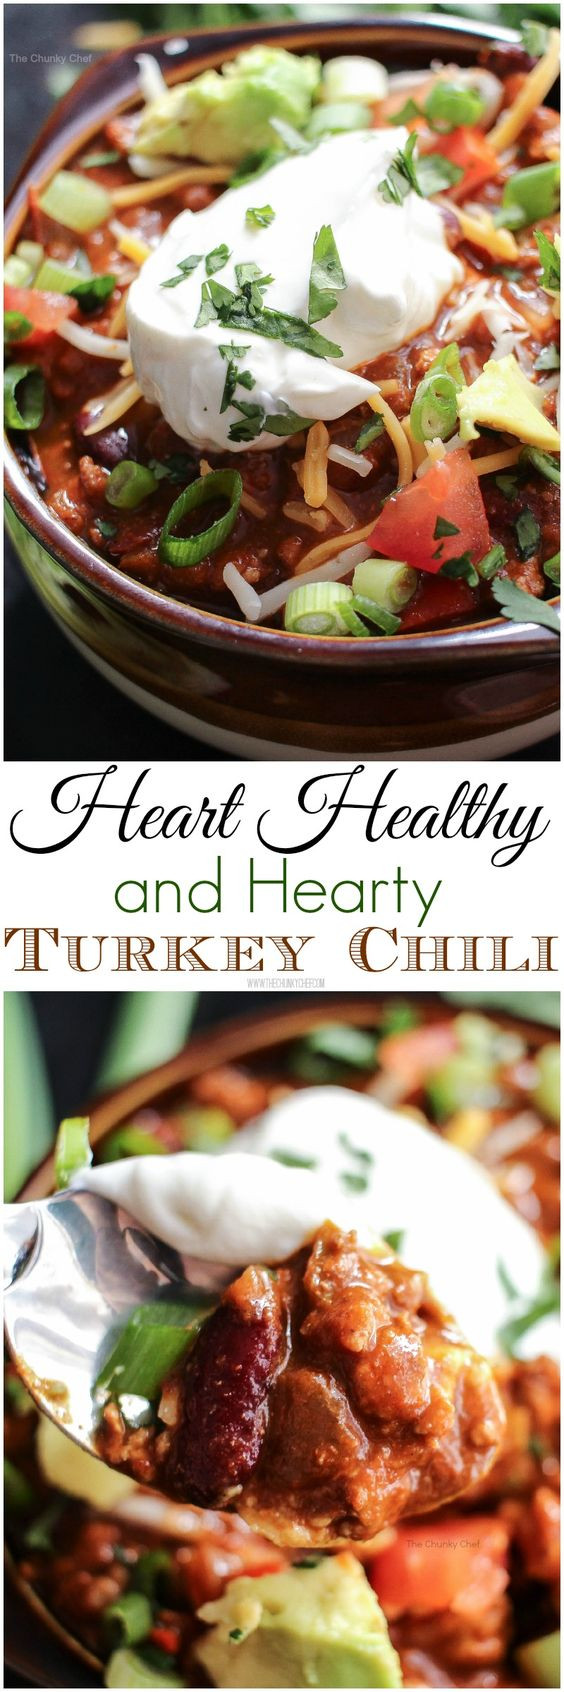 Heart Healthy Winter Recipes
 28 Healthy Winter Recipes to Start Your New Year s f Right